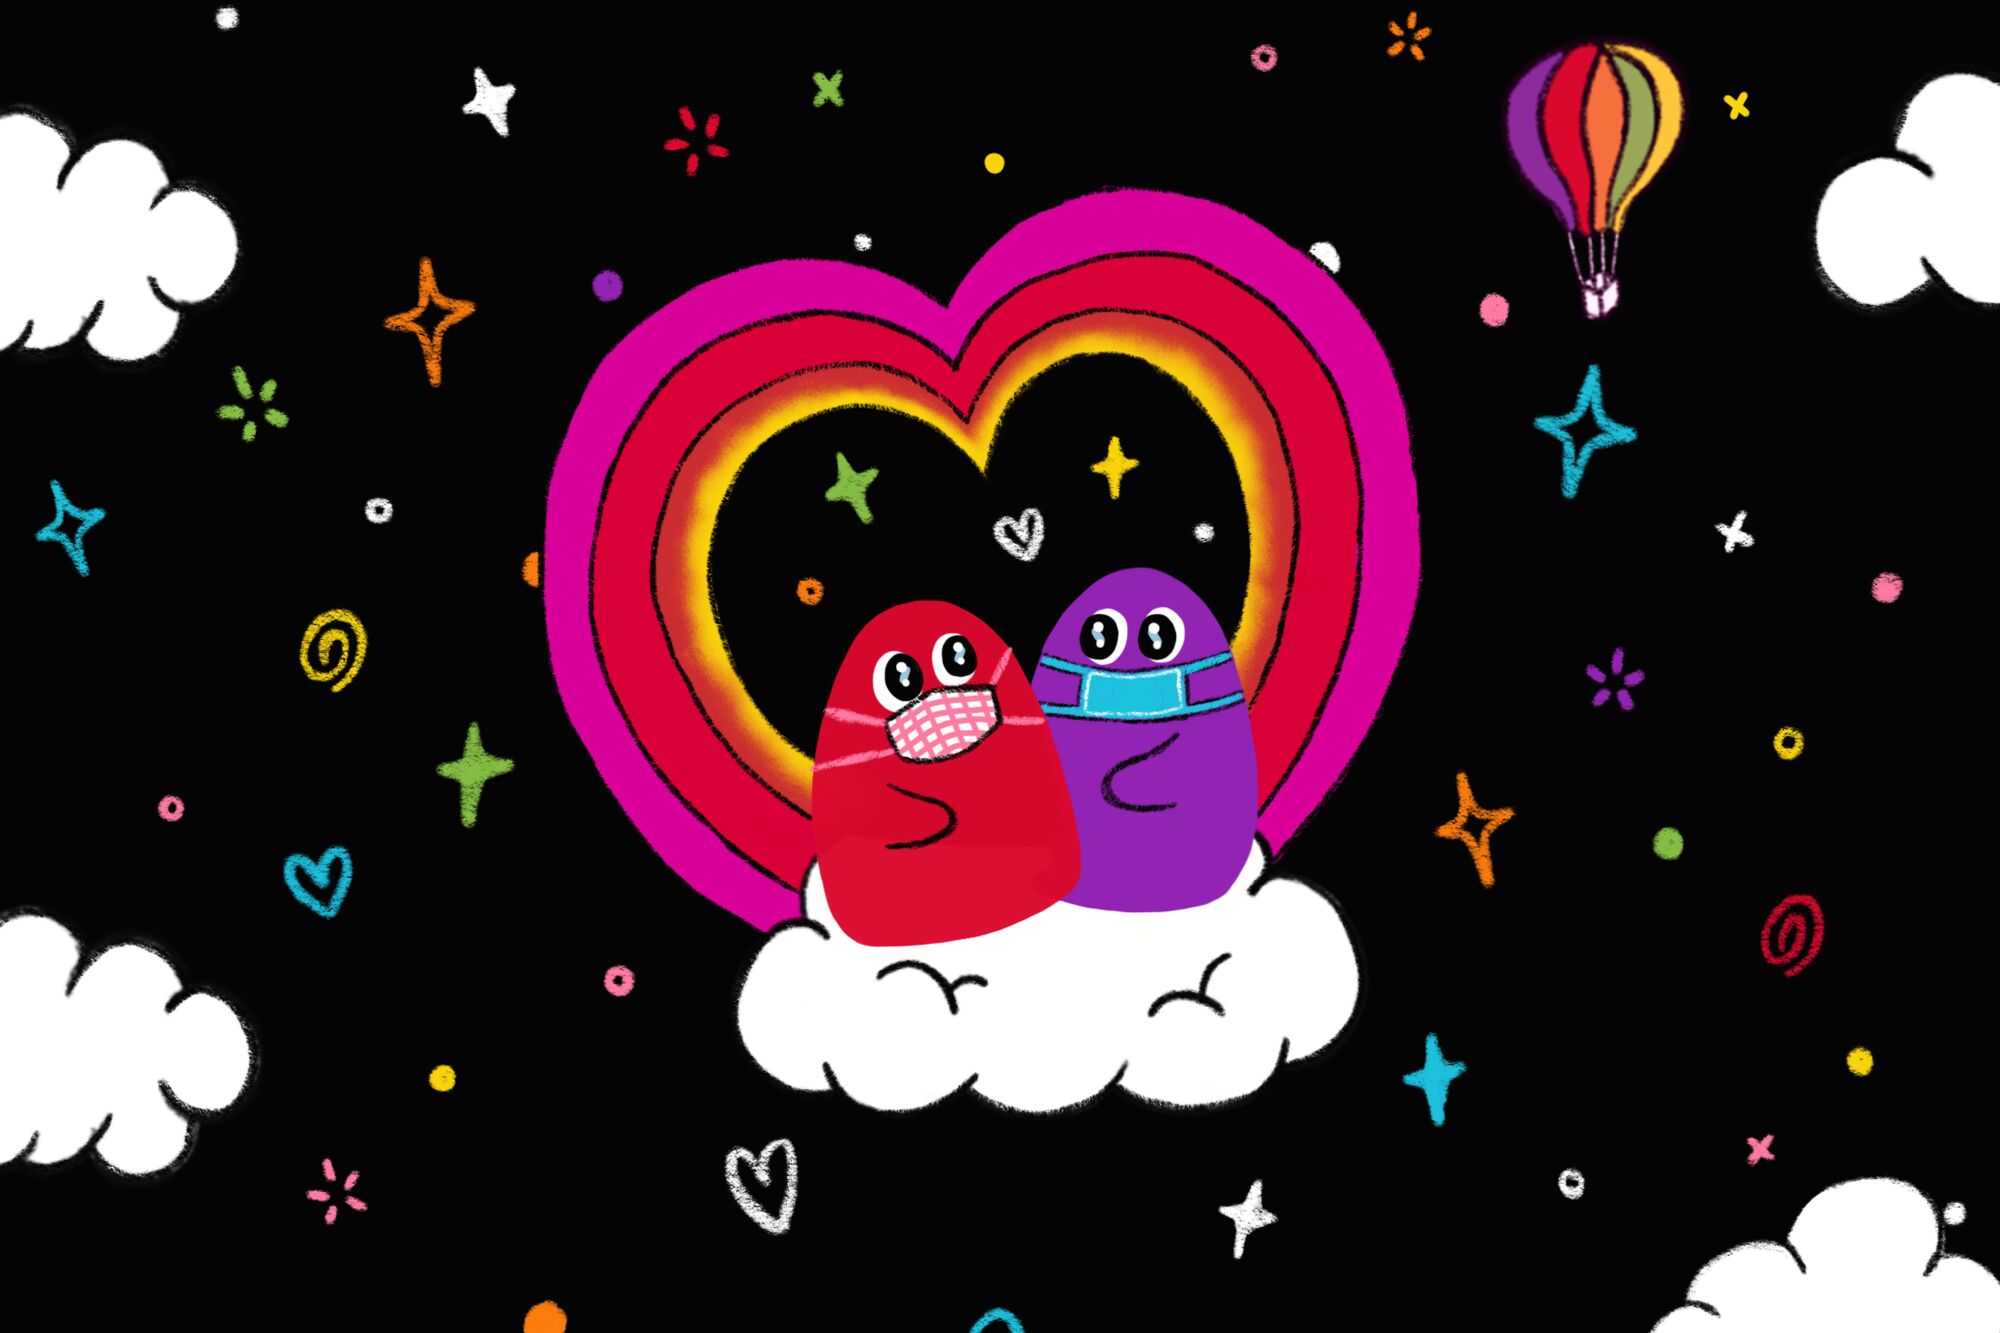 An illustration of two blobs wearing masks, sitting on a cloud in front of a rainbow heart